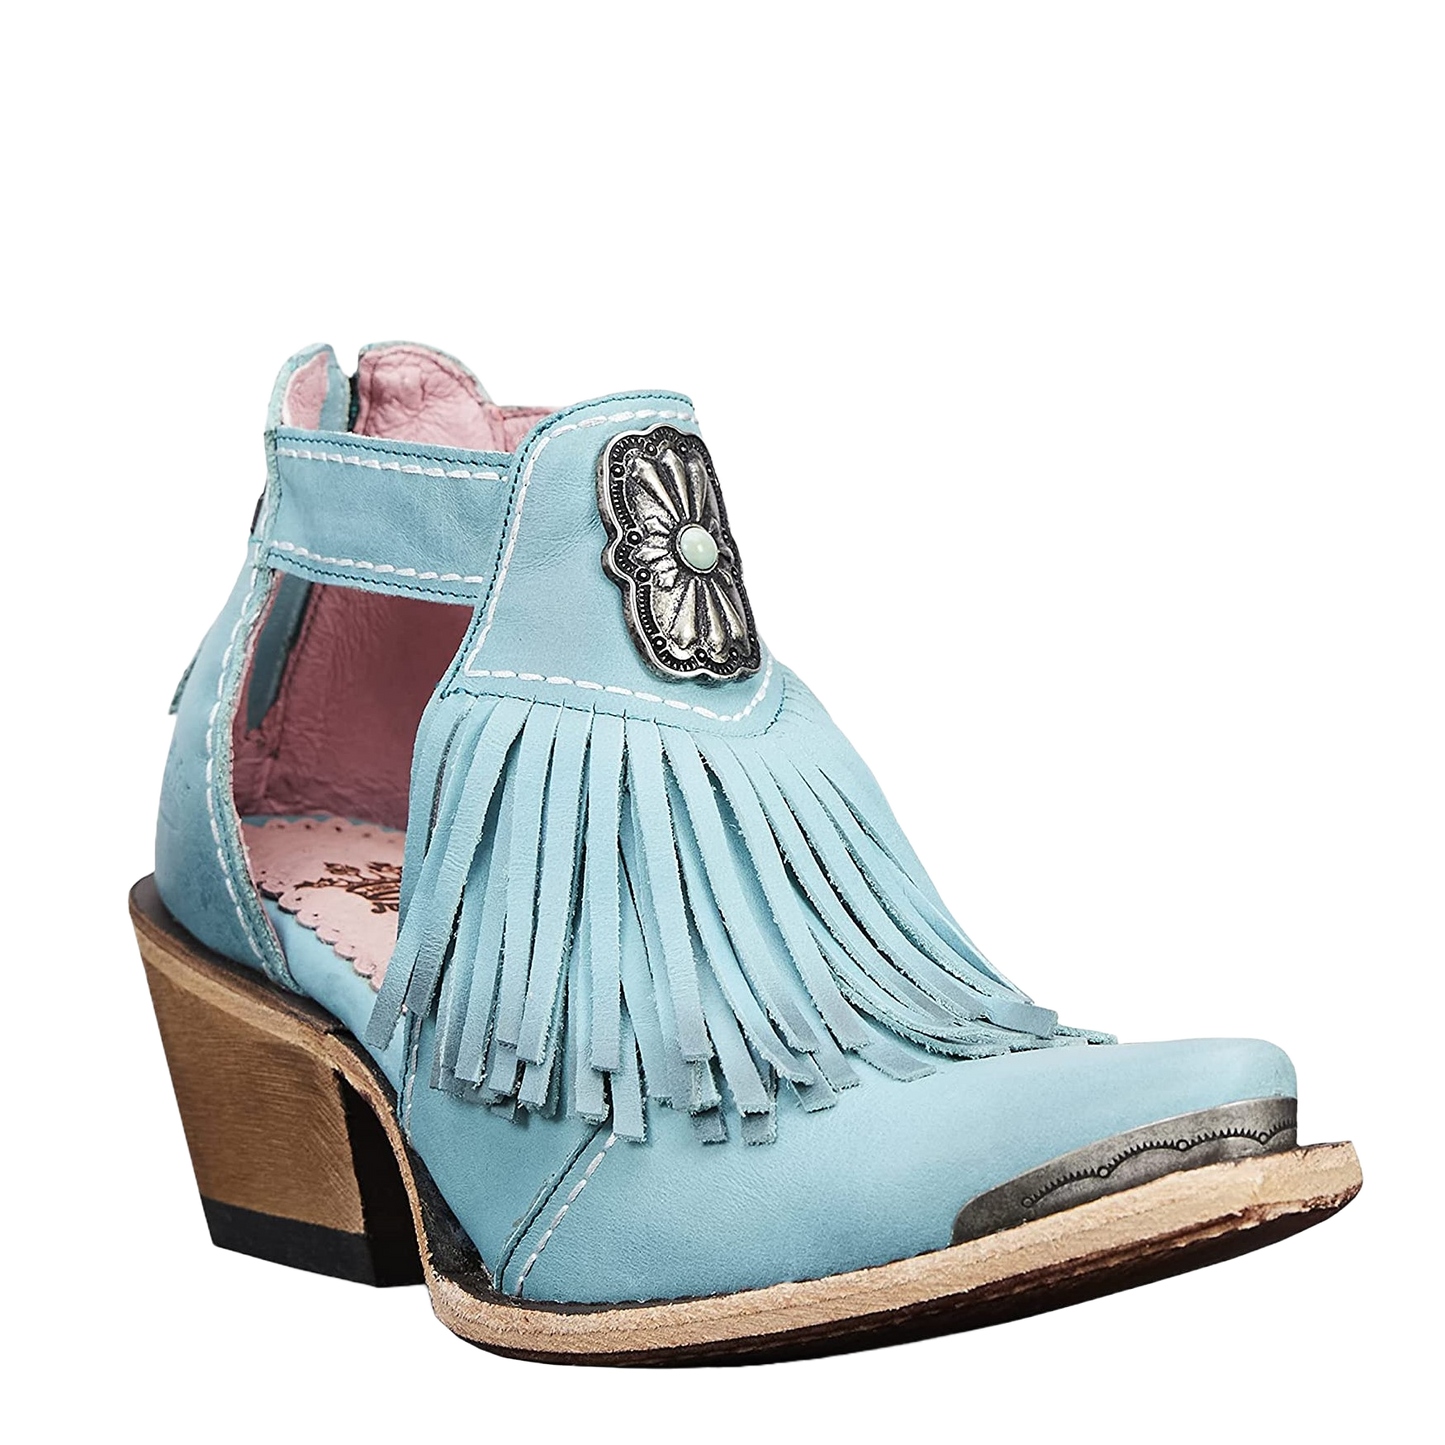 Junk Gypsy By Lane Ladies Kiss Me At Midnight Turquoise Booties JG0066C